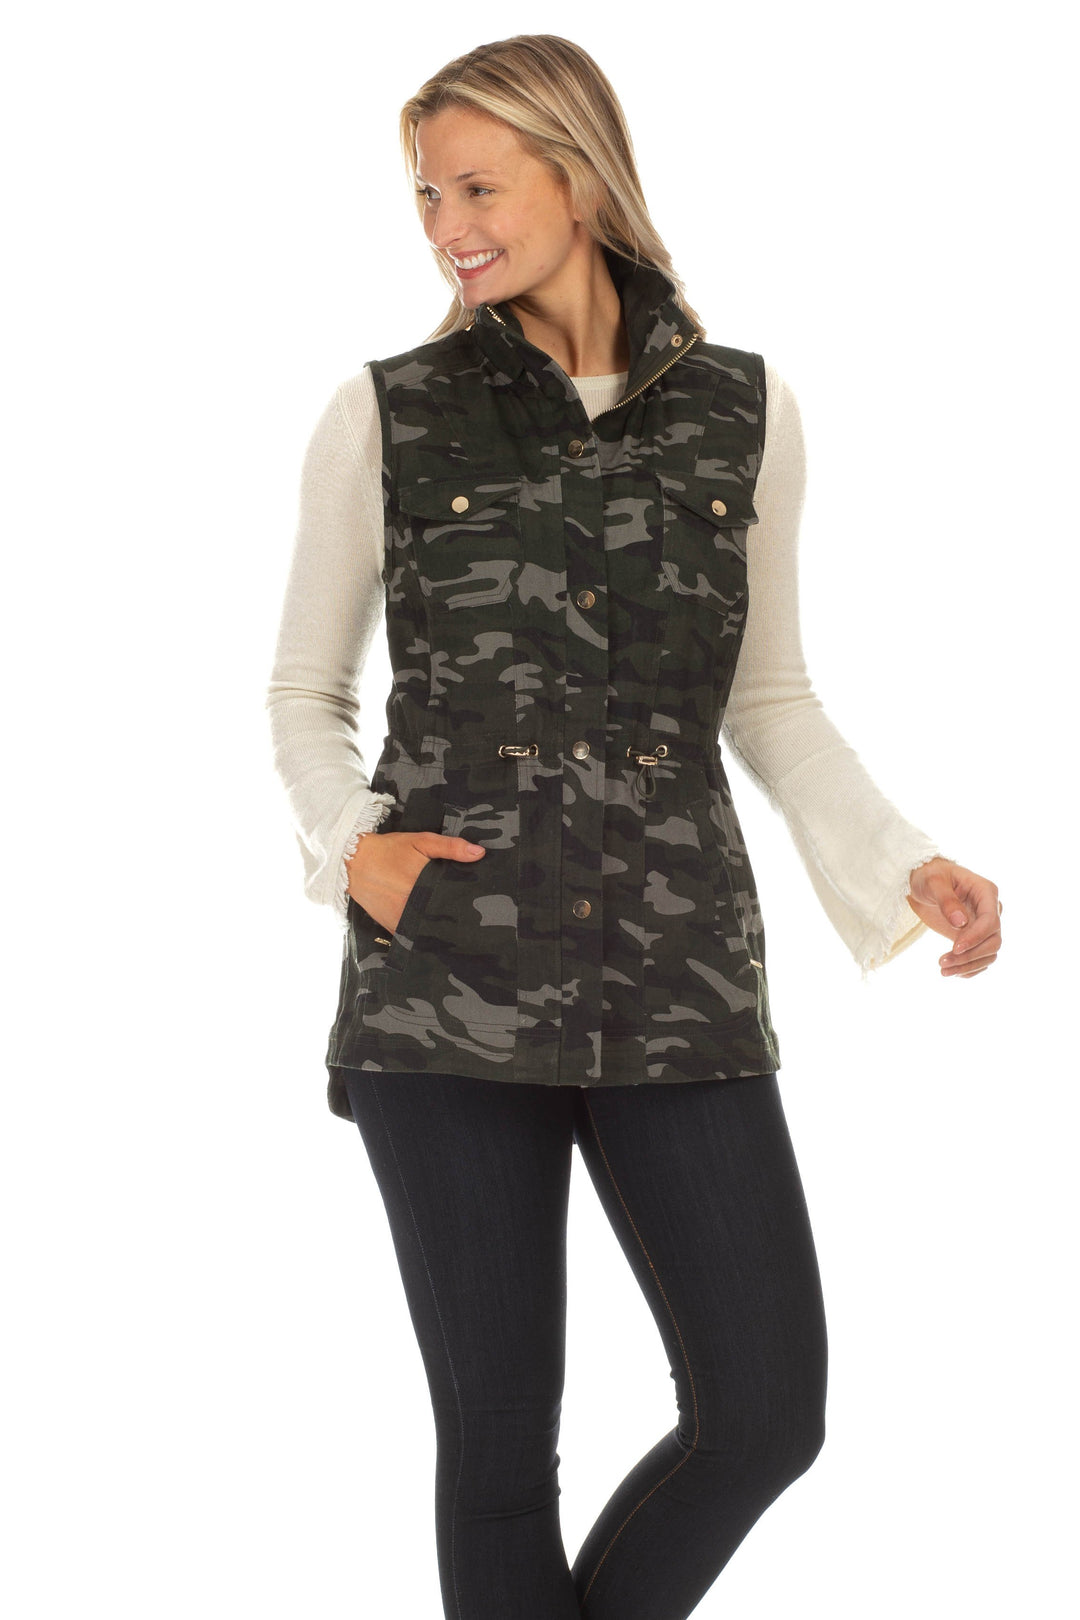 Sumner Camouflage Gold Embellished Vest
The top-selling piece in this year's collection - the Sumner Vest in Camo. A staff favorite, the Sumner Vest is the perfect layering piece for sweaters and long sleeve tees all season long! An adjustable waist band makes this vest an extremely flattering layer piece! Camo Vest Gold Embellishments 100% Cotton, Imported Machine wash on cold, hang to dry
Sumner Camouflage Gold Embellished Vest
A staff favorite, the Sumner Vest is the perfect layering piece for sweaters a